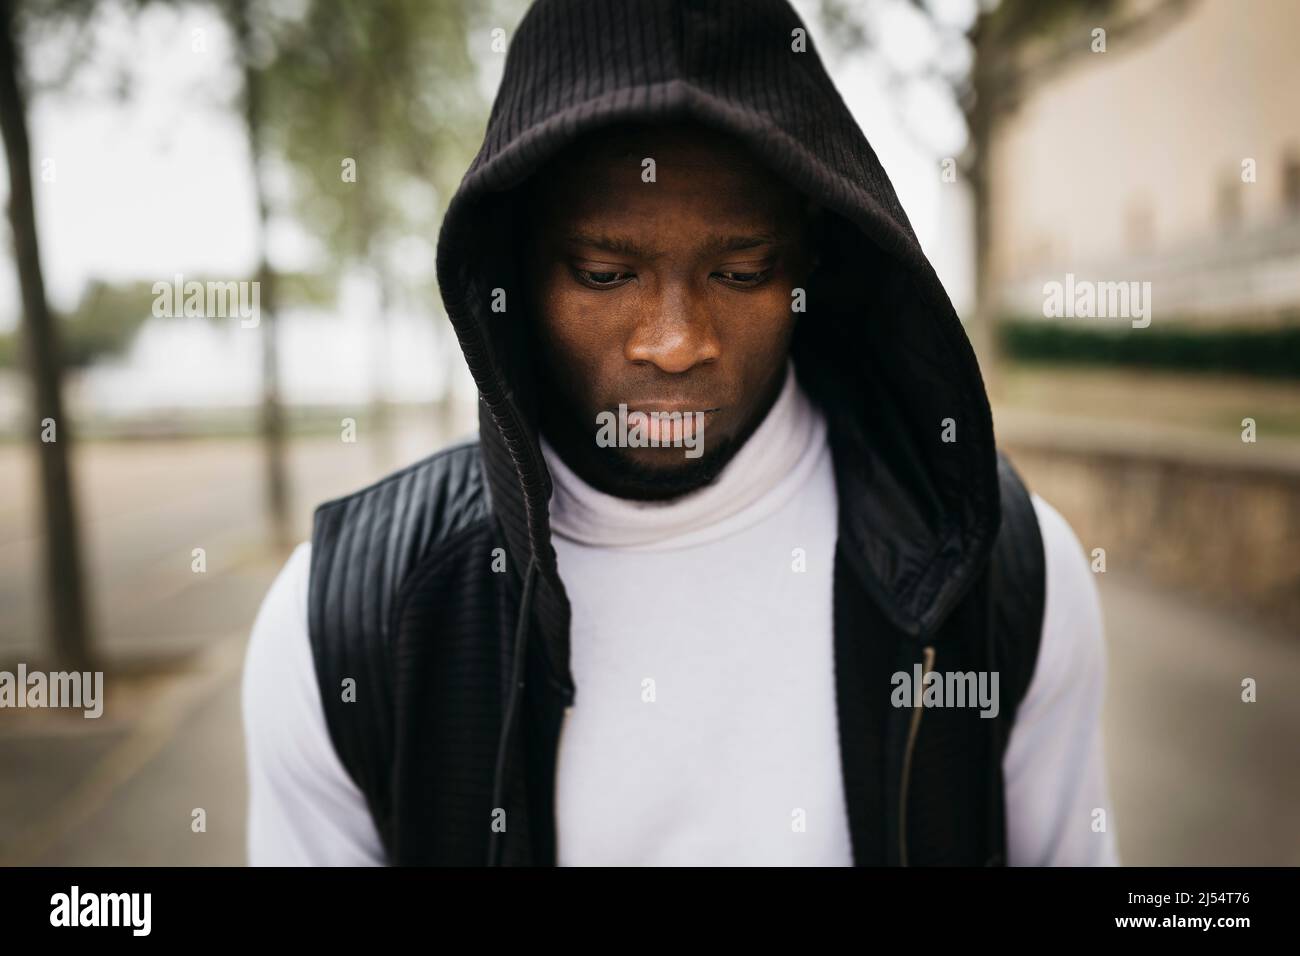 Portrait of a hooded young black male on the street Stock Photo